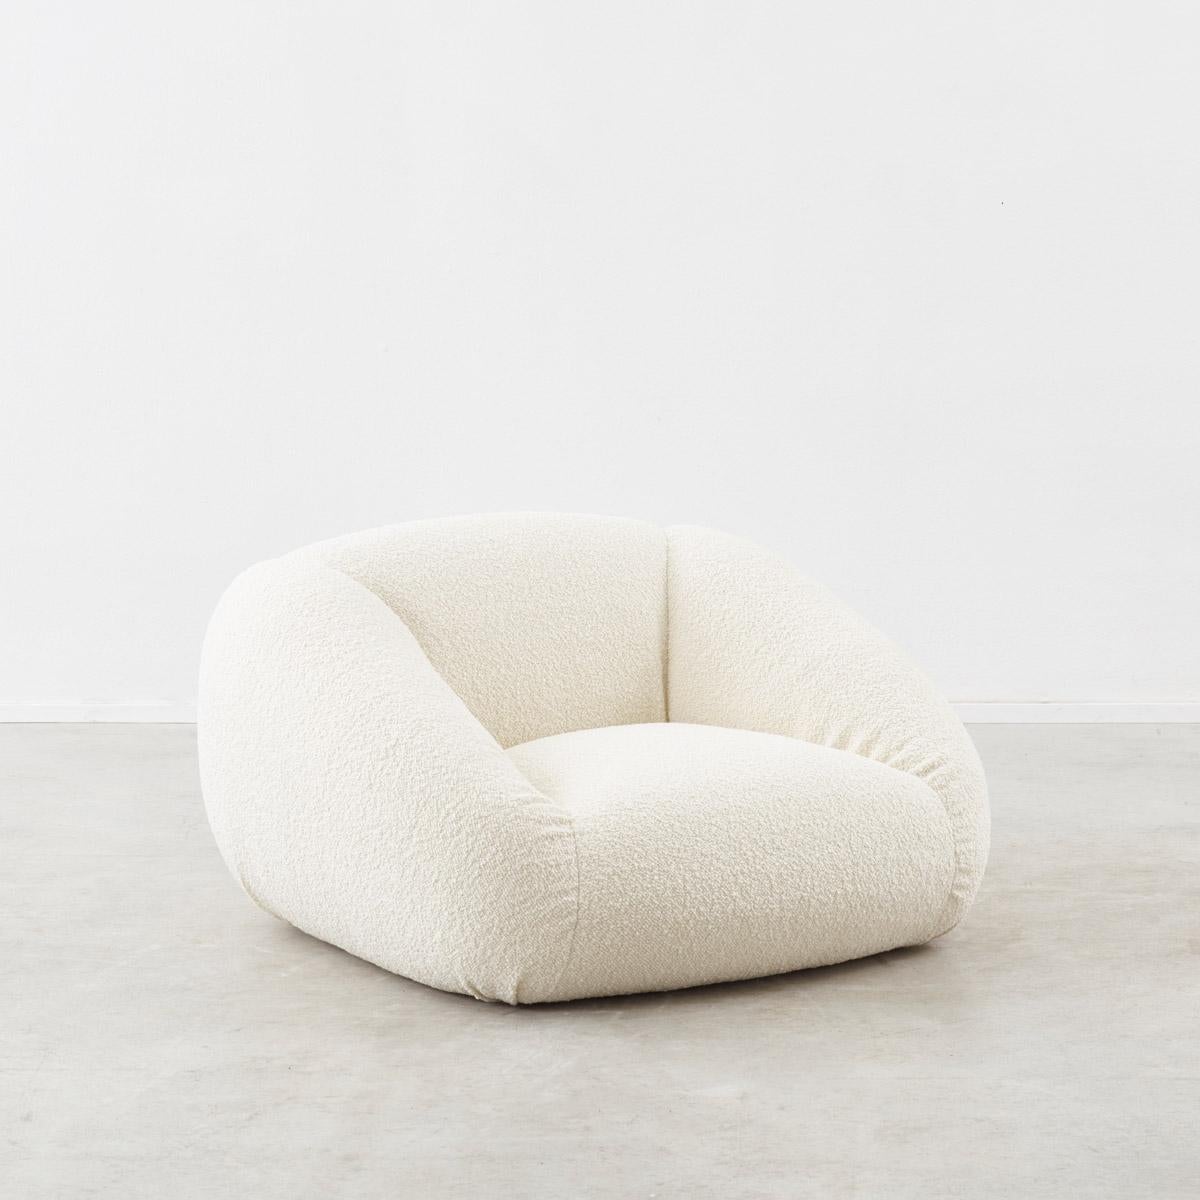 A marshmallow-like armchair ideal for low-slung lounging. Part of the T.E.E. collection designed by Gruppo G14, the T.E.E. armchair can be used individually or lined together amongst the collection to form a modular system with sofas and chairs